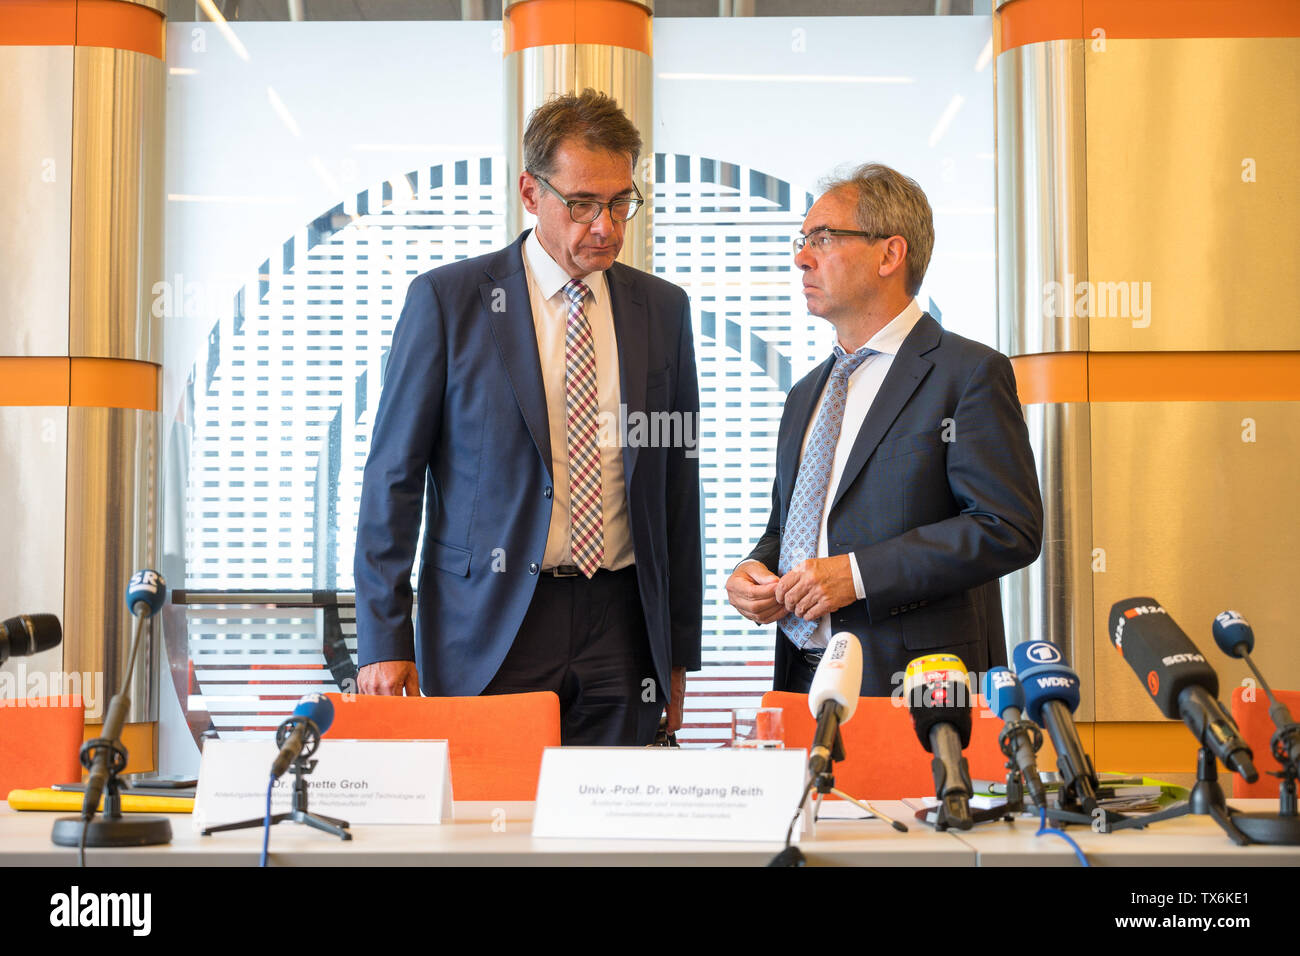 Homburg, Germany. 24th June, 2019. Wolfgang Reith (r), Medical Director of  the Saarland University Hospital, and Michael Görlinger, Senior Public  Prosecutor, speak to each other before a press conference. By 2014, an